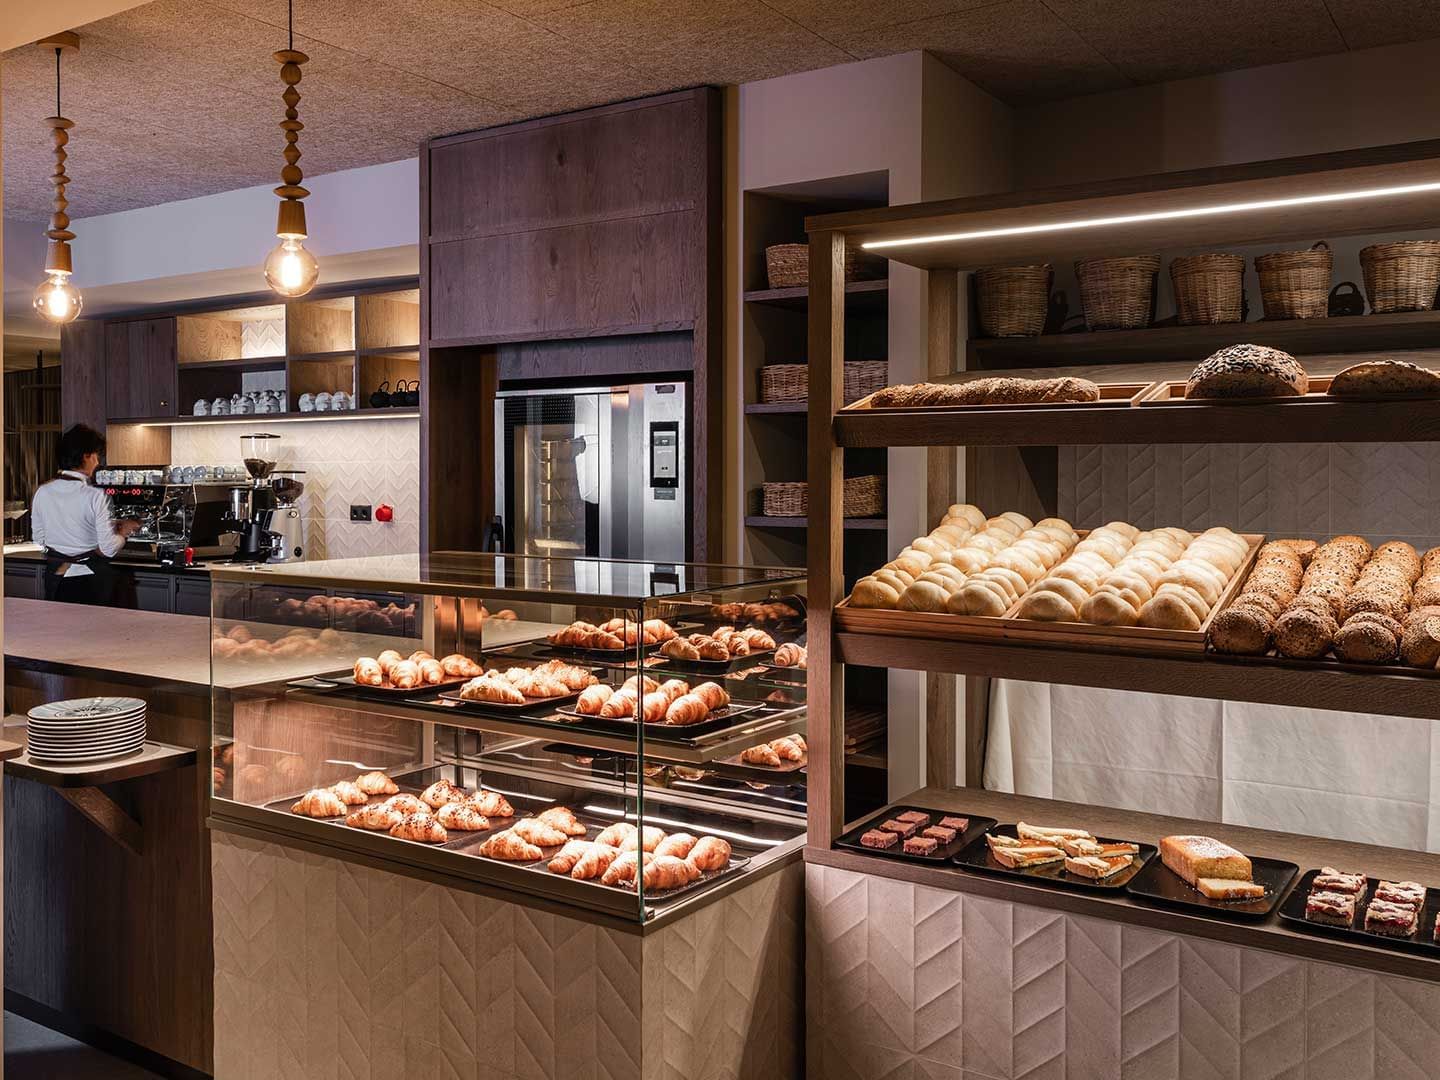 Baked products in shelves at Italian Bar, Falkensteiner Hotels